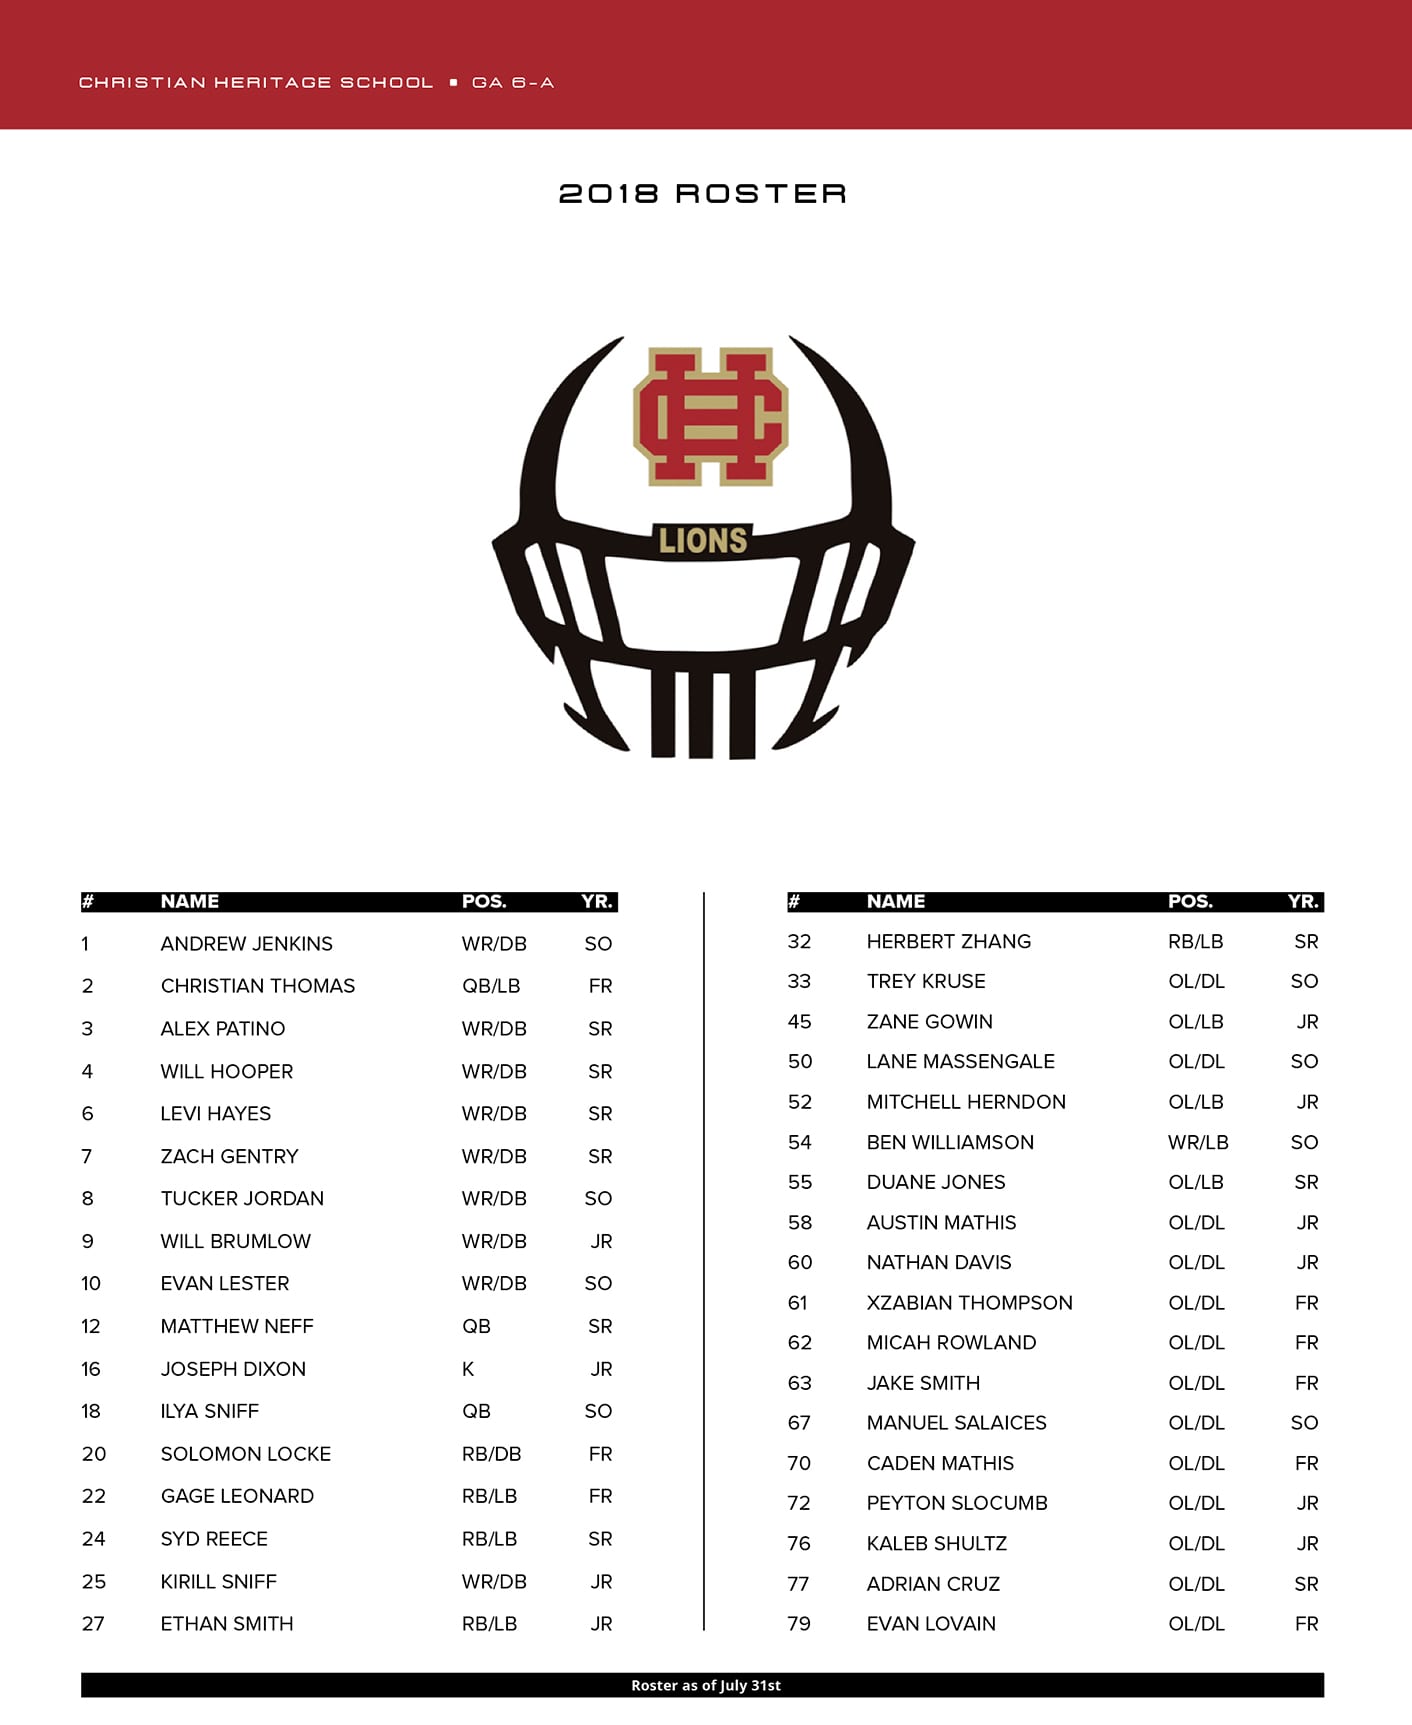 Christian Heritage School High School Football 2018 roster in Chattanooga